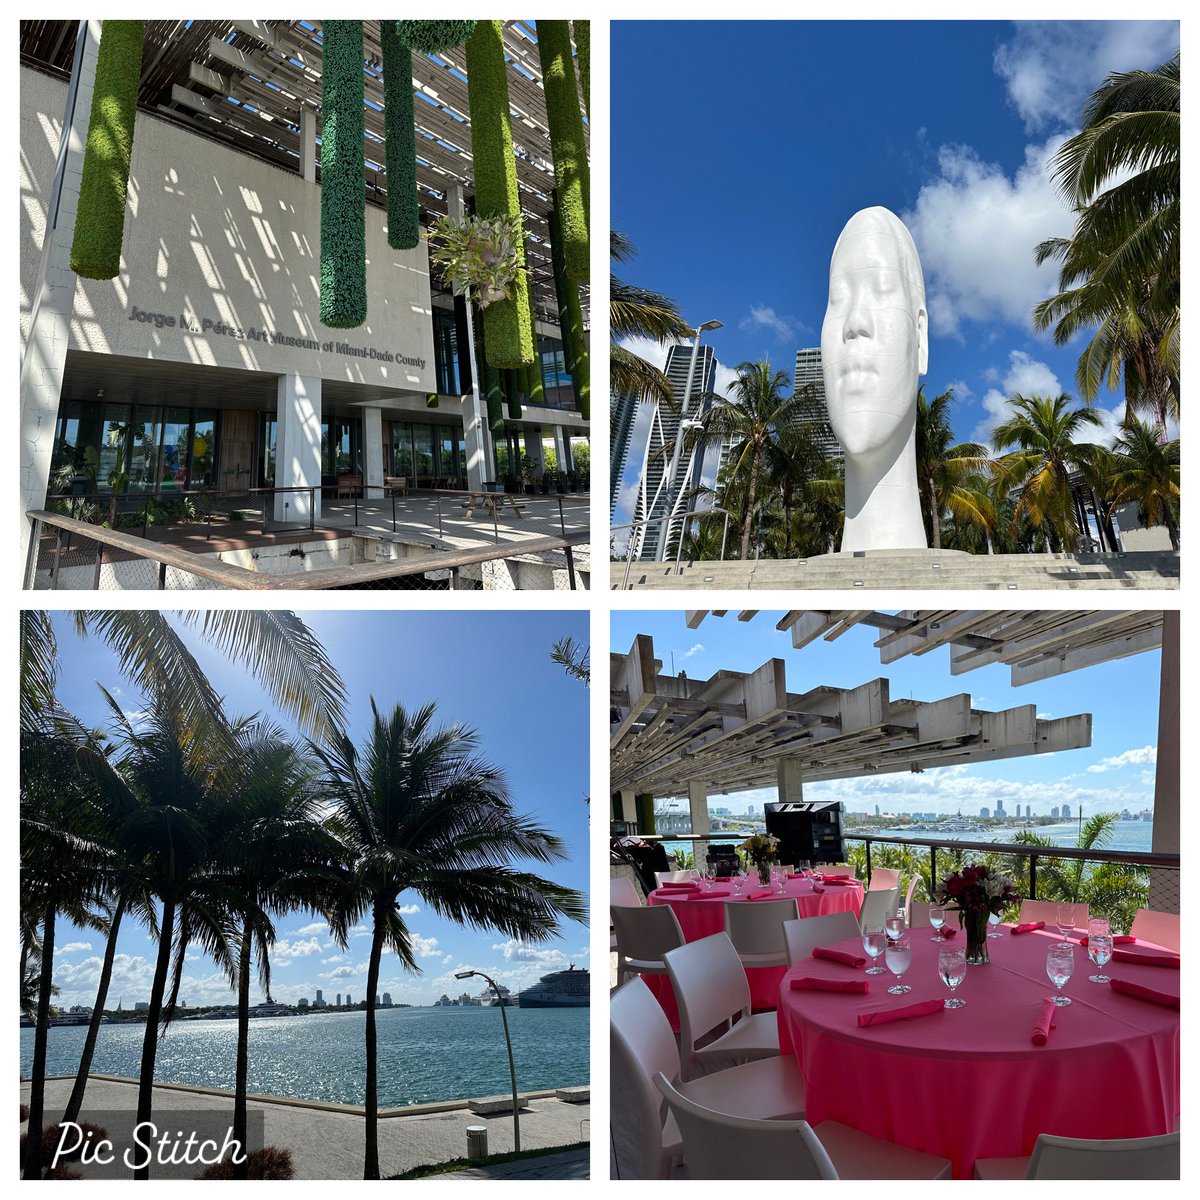 Perez museum, Miami, was such a stunning venue to do a keynote! Thanks AWS for such an amazing ‘Women in Cloud’ event!